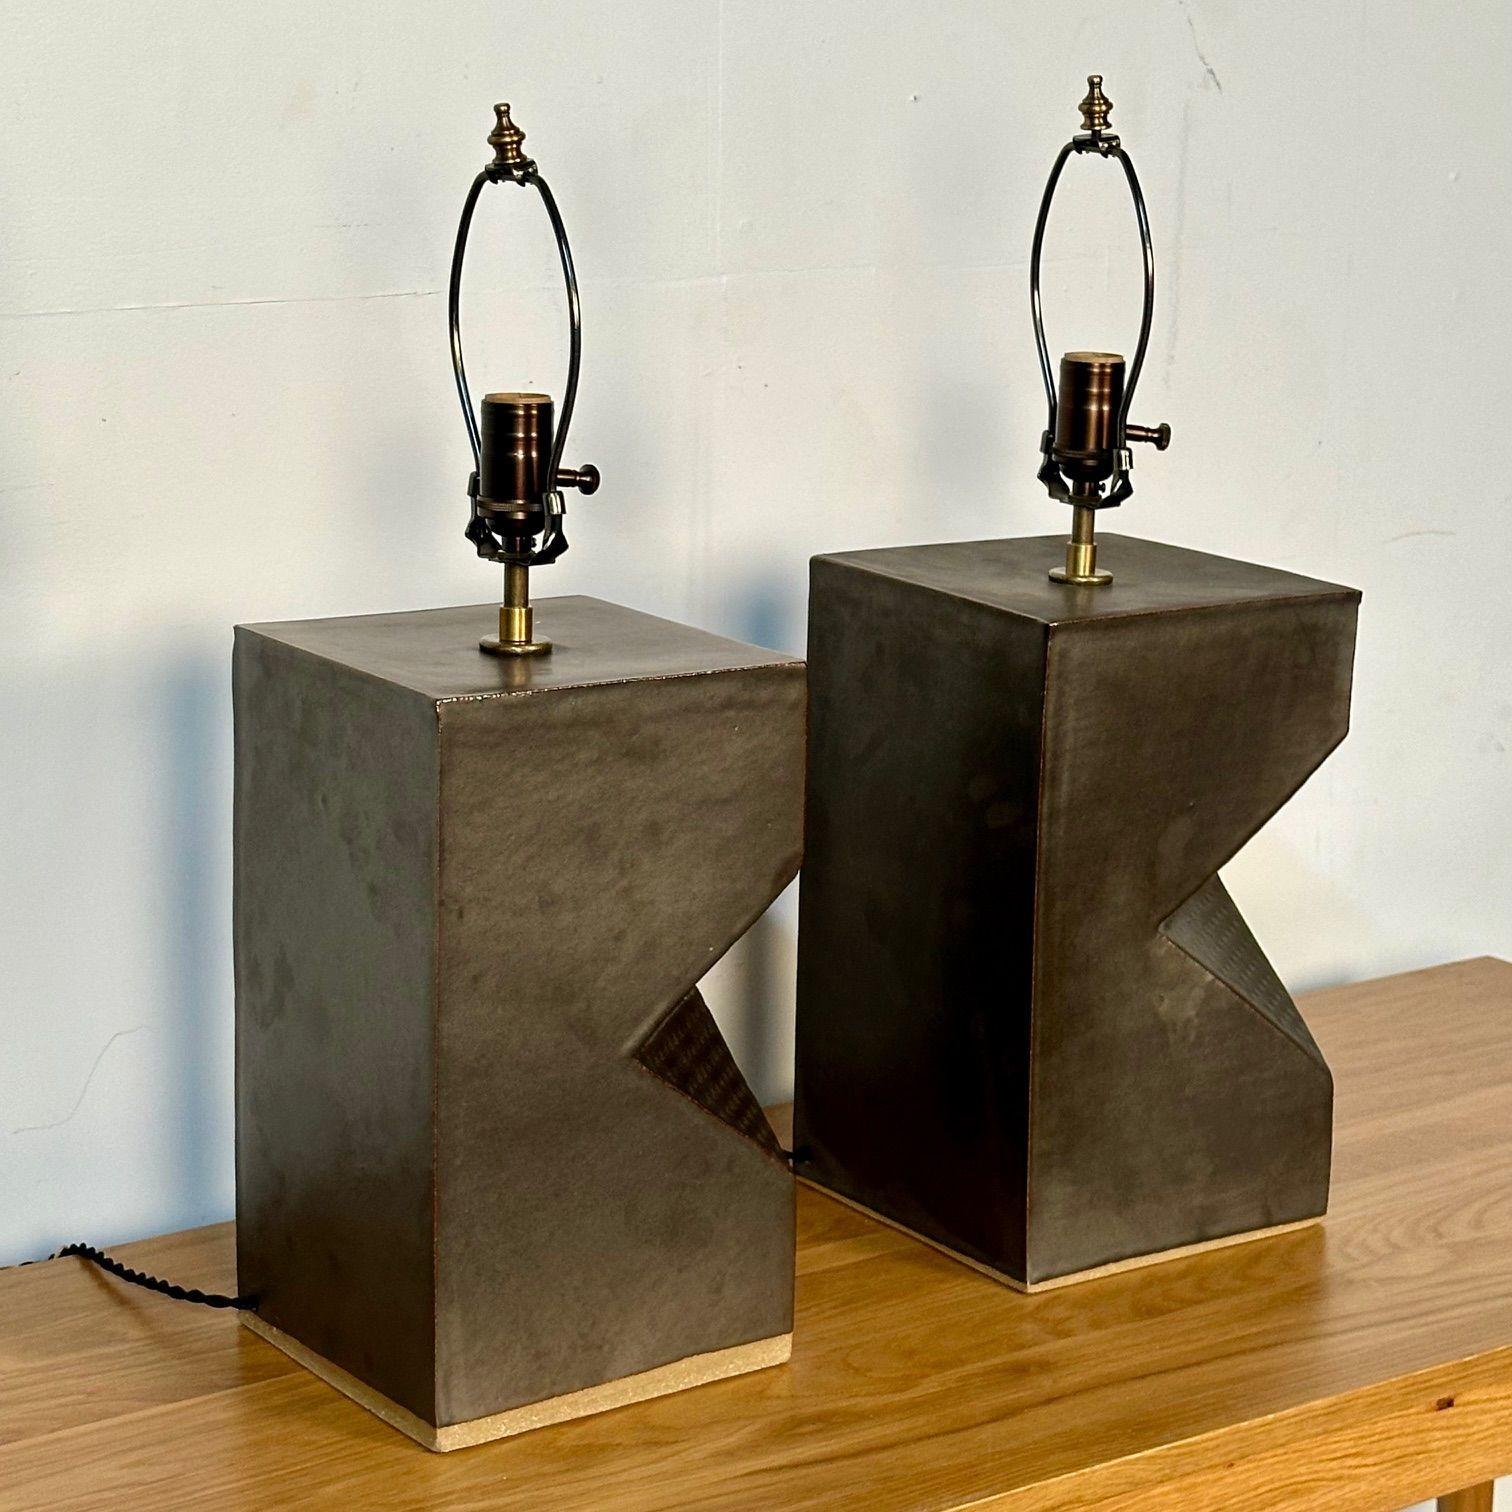 Dumais Made, Contemporary, Ceramic Table Lamps, Dark Brown Walnut Glaze, 2021 In New Condition For Sale In Stamford, CT